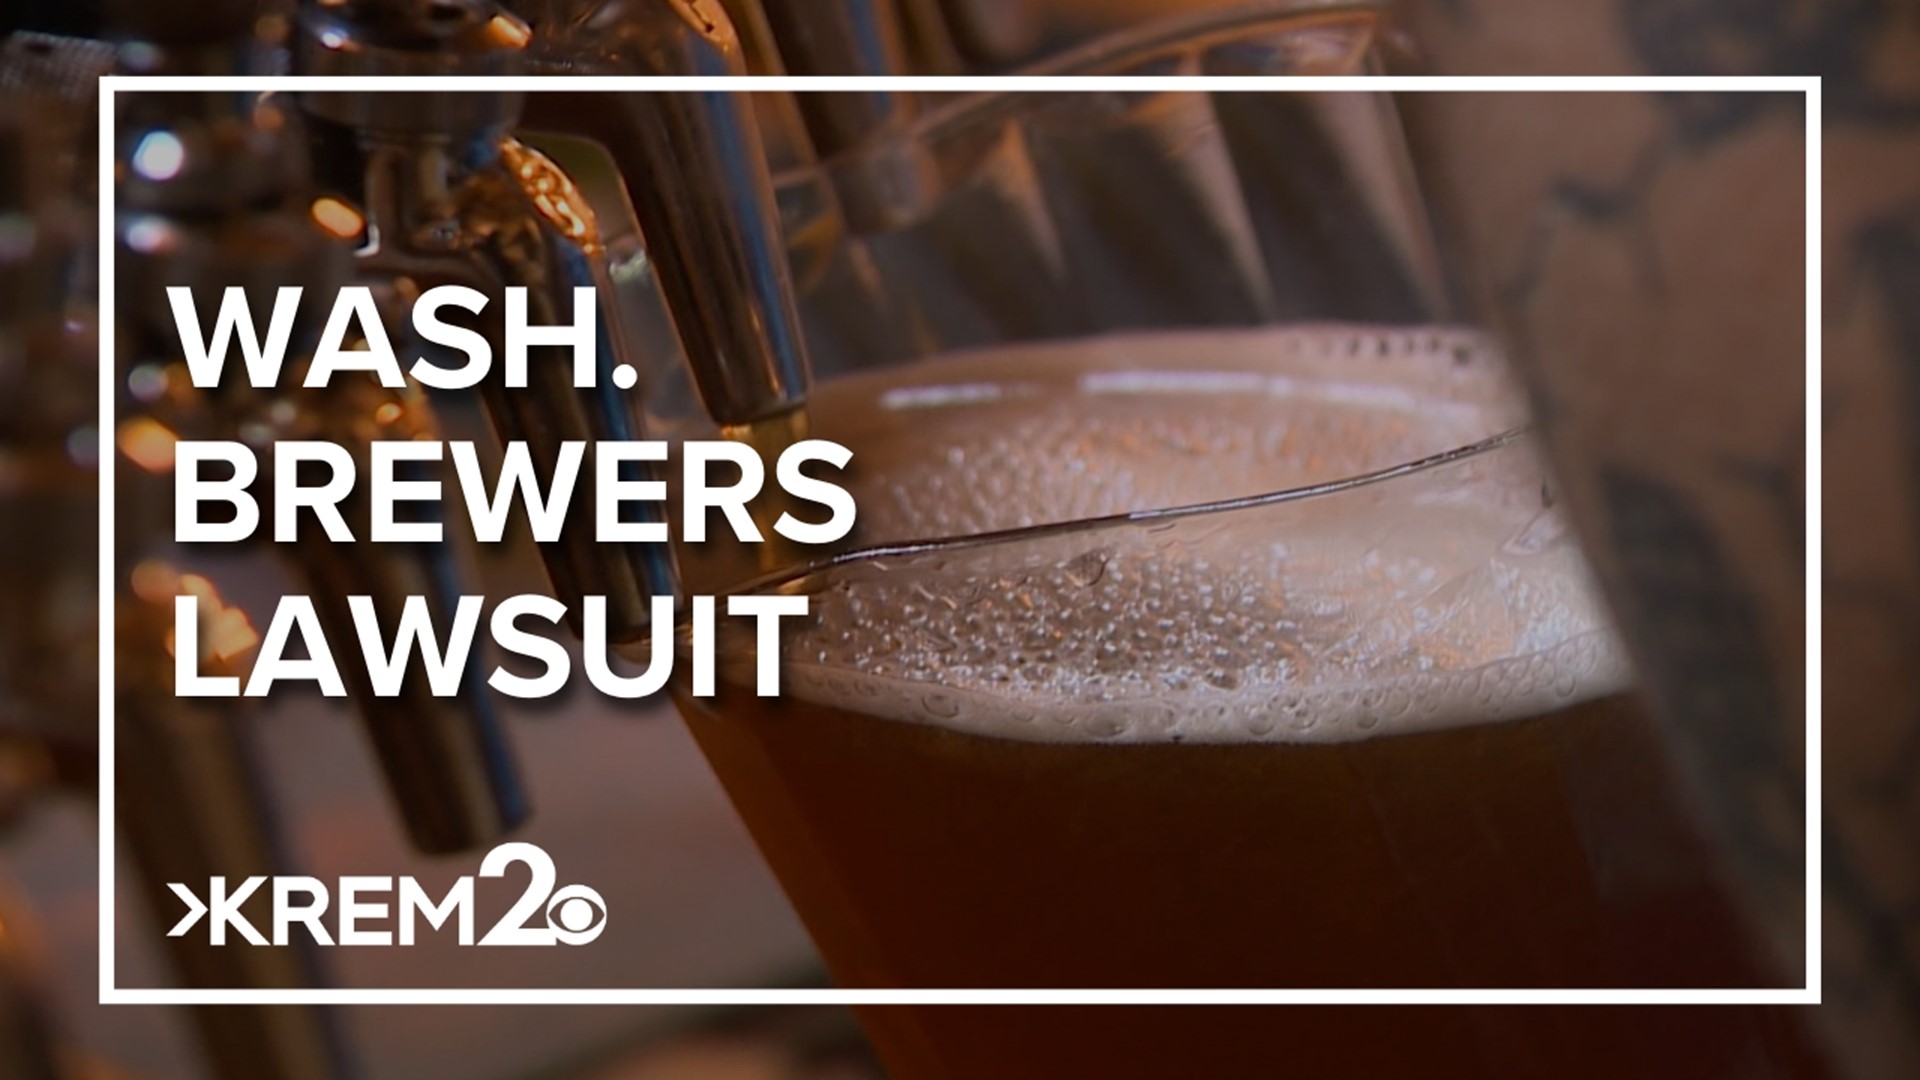 Washington breweries are suing the state of Idaho. Owners of breweries say they want the same treatment as brewers in Idaho.